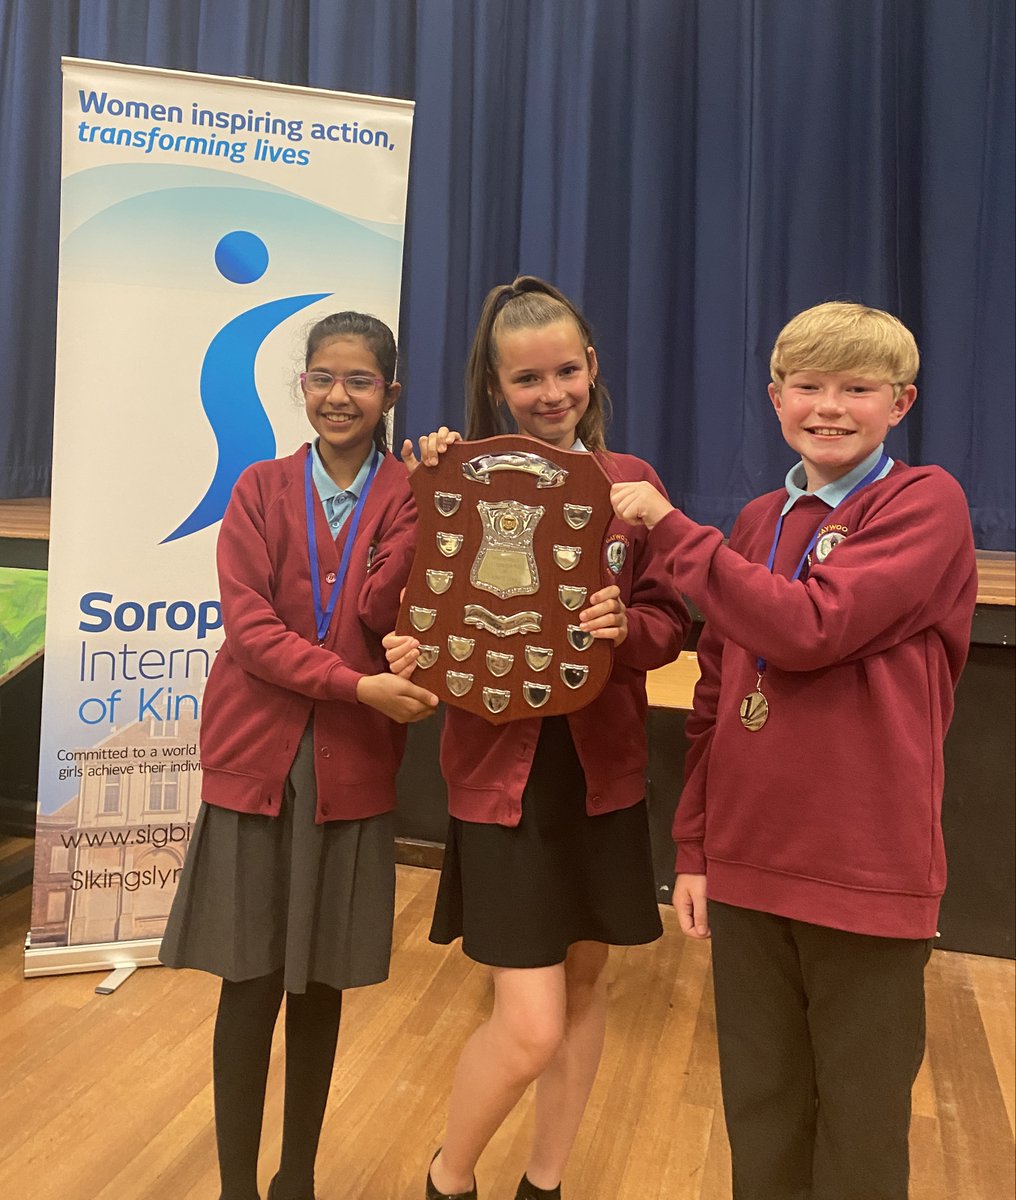 Congratulations to our three representatives who took part in the Soroptimist International of King's Lynn Public Speaking Competition yesterday and achieved first place. 👏👏👏 @WNAT_Home @beckywalker306 @YourLocalPaper @TheLynnNews @edpkingslynn